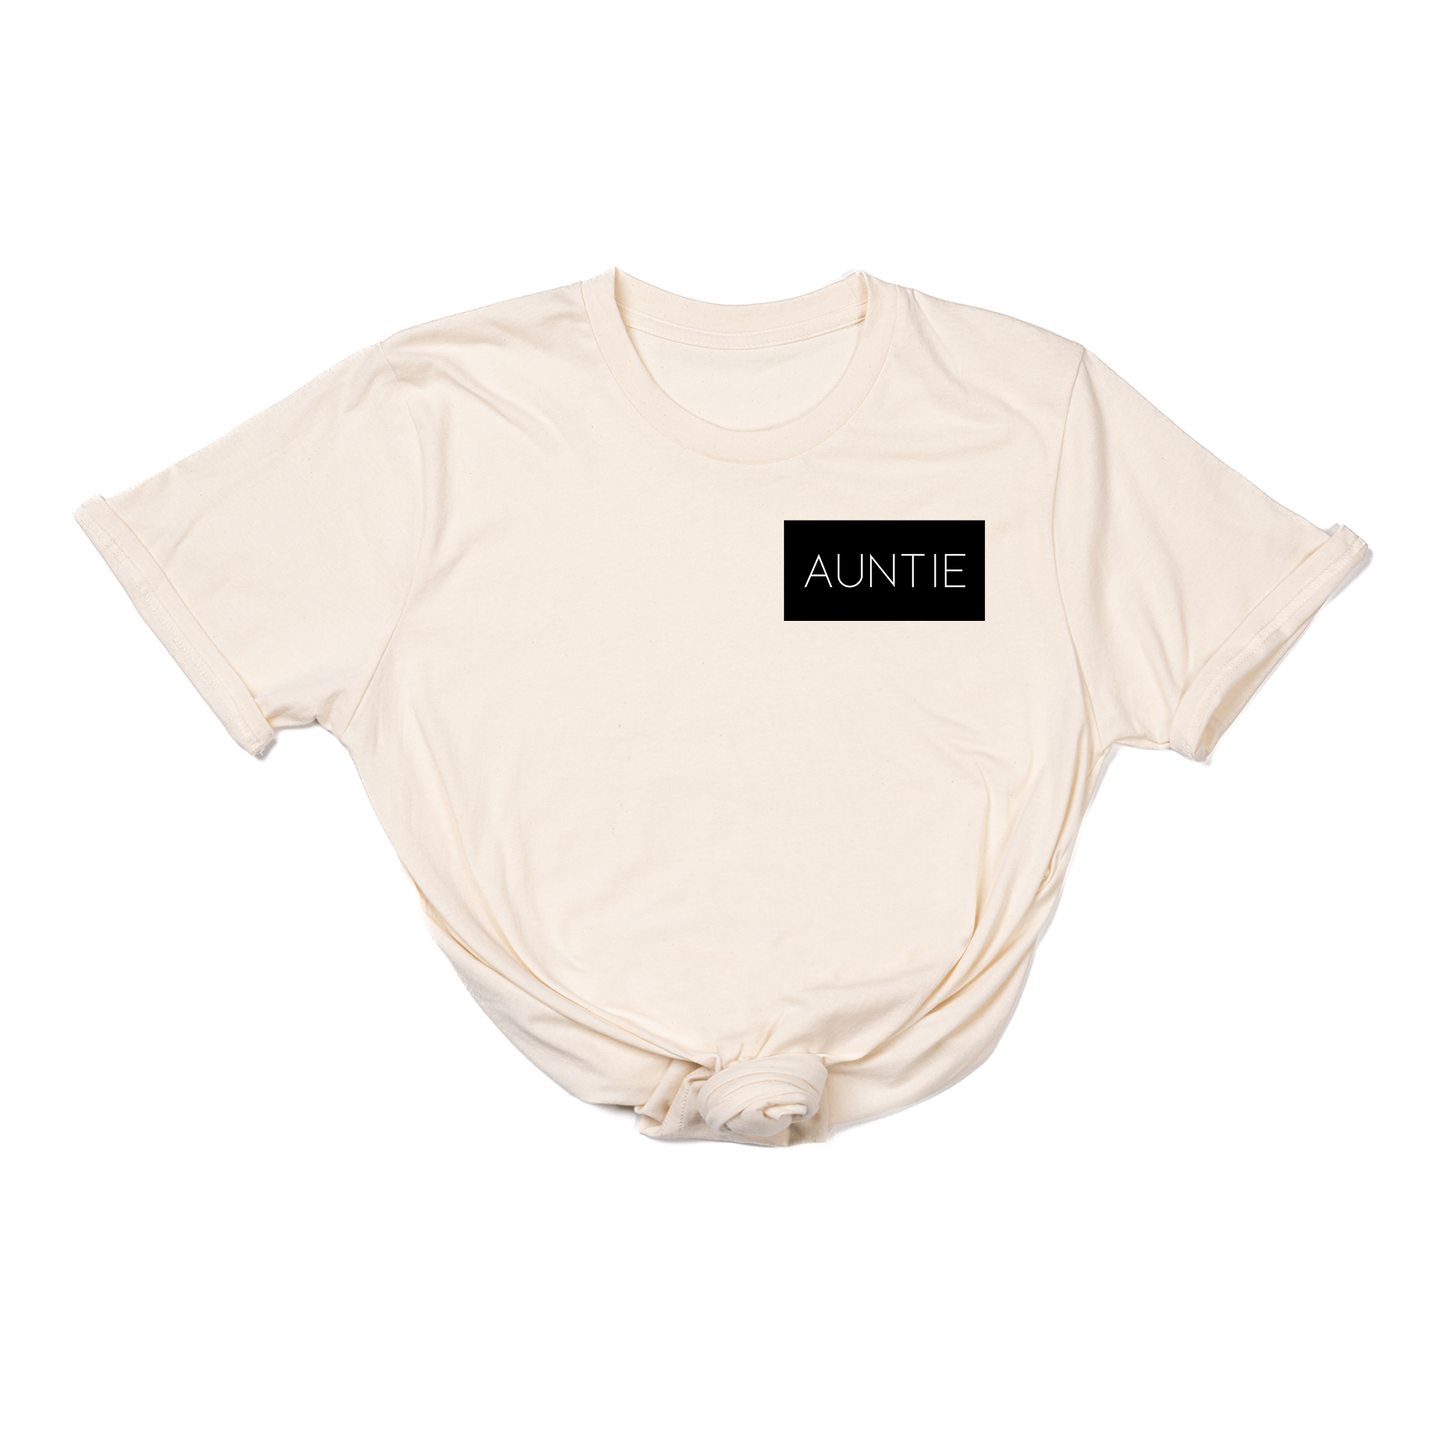 Auntie (Boxed Collection, Pocket, Black Box/White Text) - Tee (Natural)